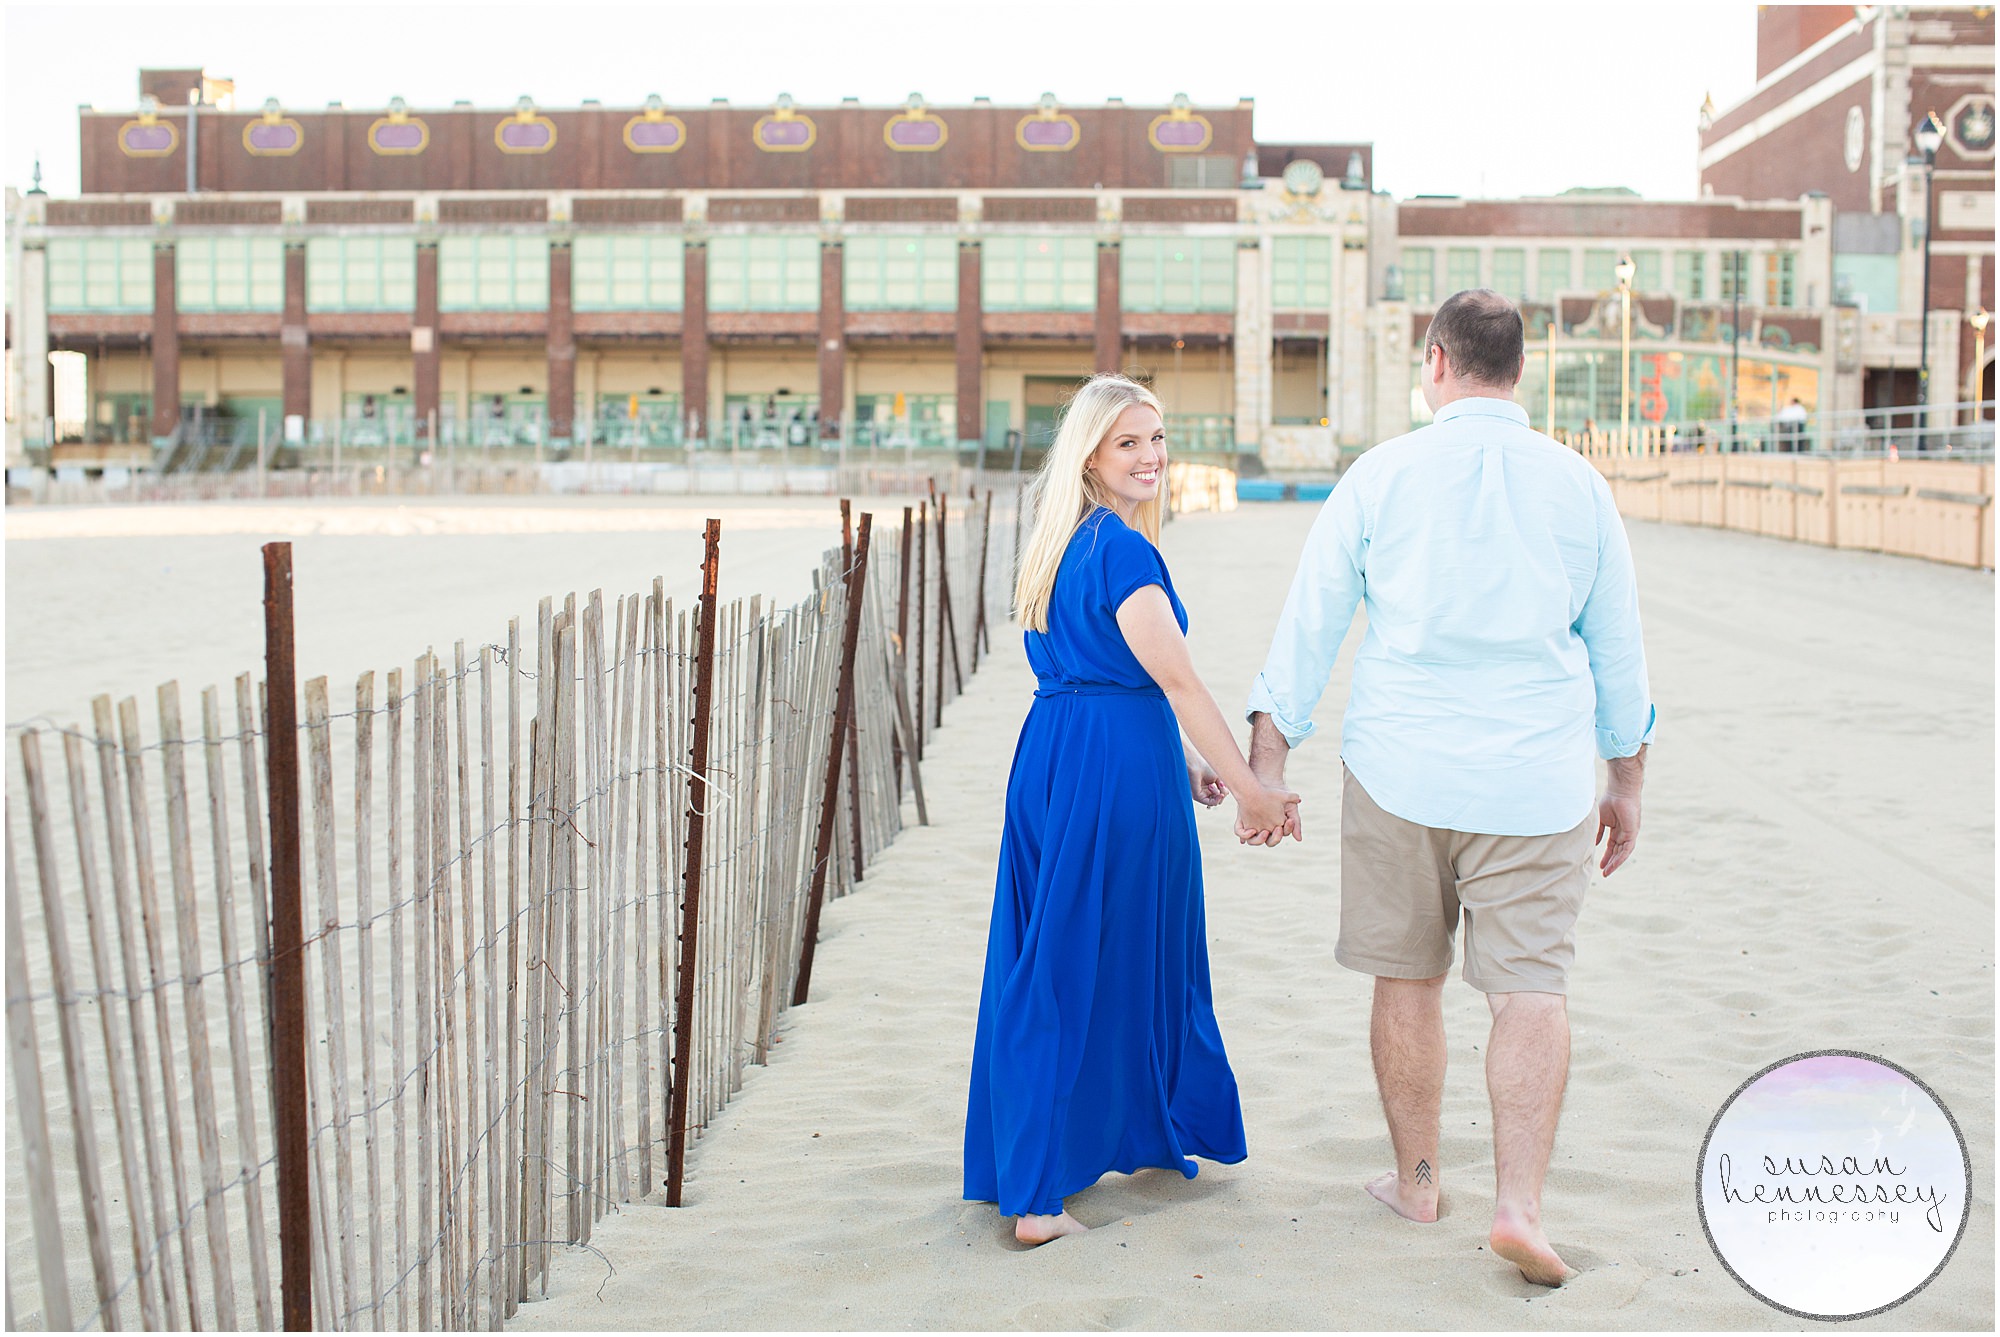 Engagement Session at Asbury Park on the beach